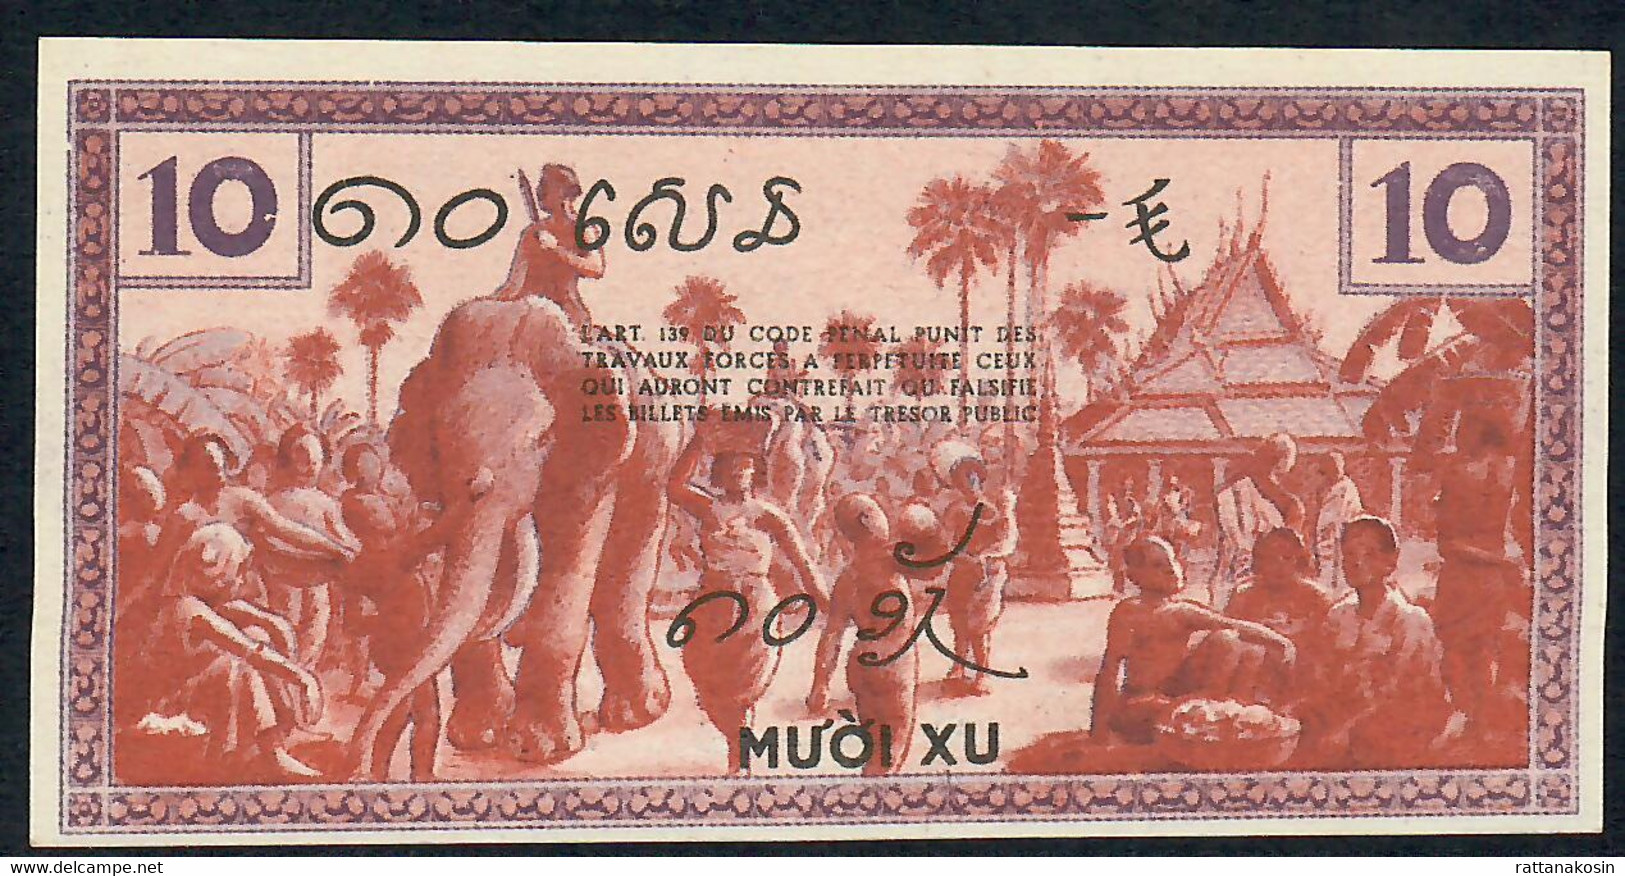 FRENCH INDOCHINA P85c  10 CENTS  1939 #AG      UNC. - Indochine